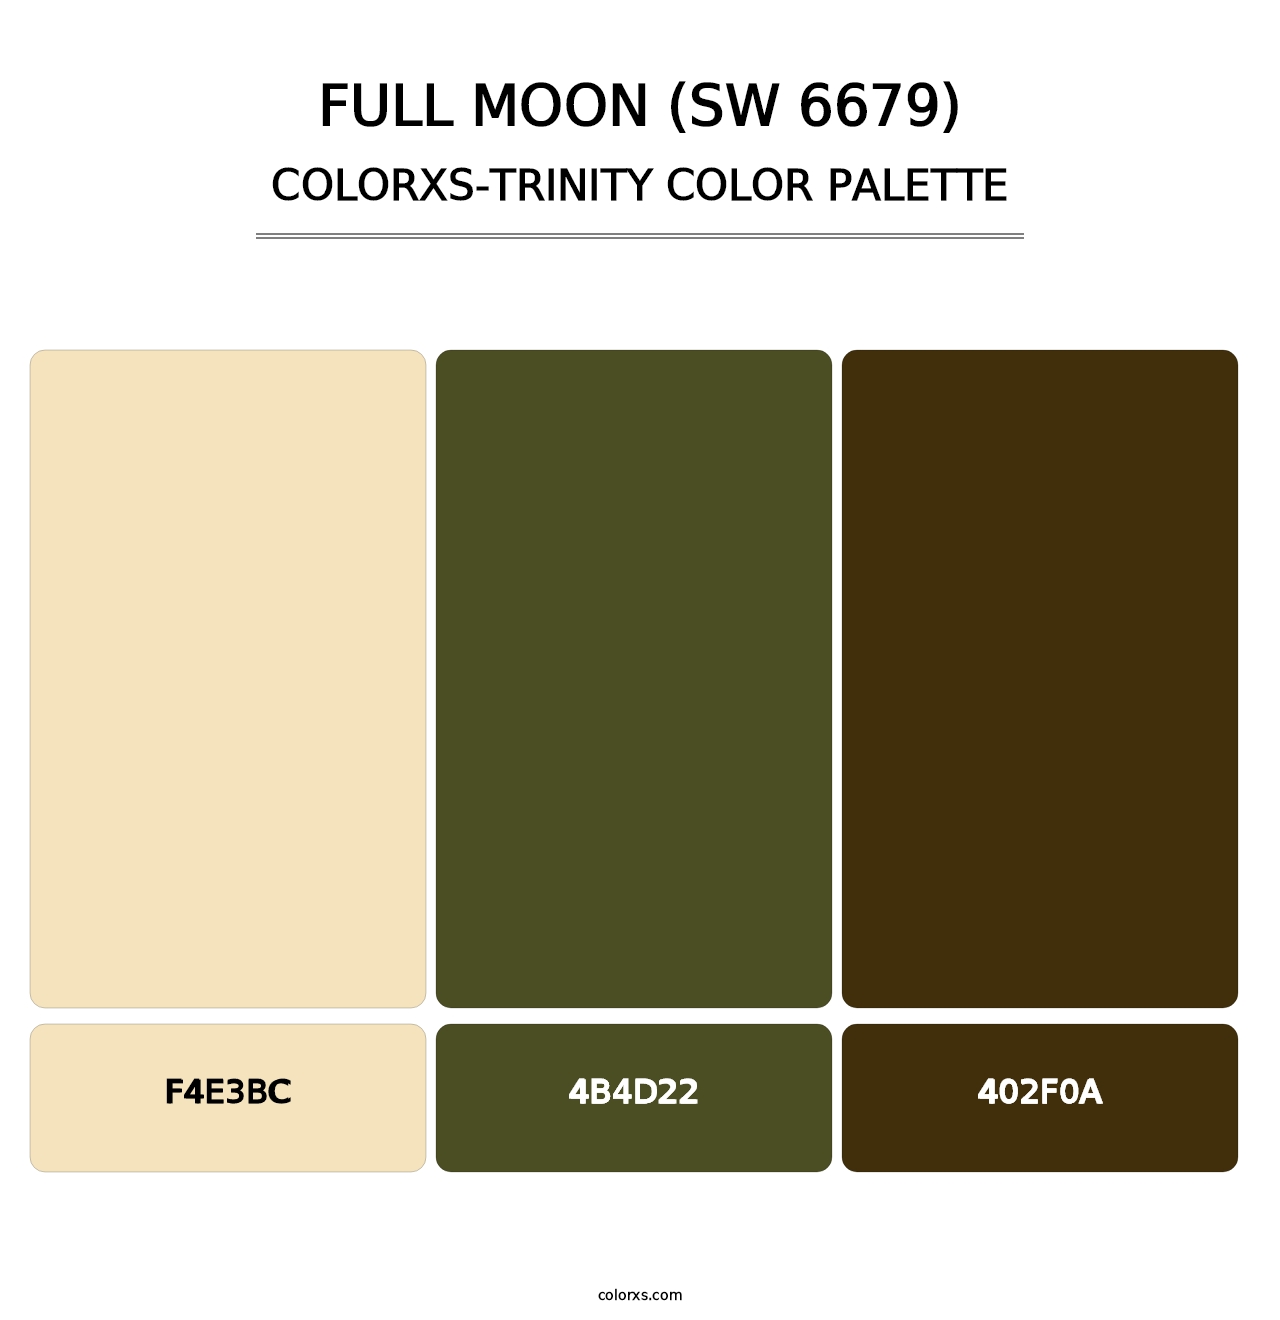 Full Moon (SW 6679) - Colorxs Trinity Palette